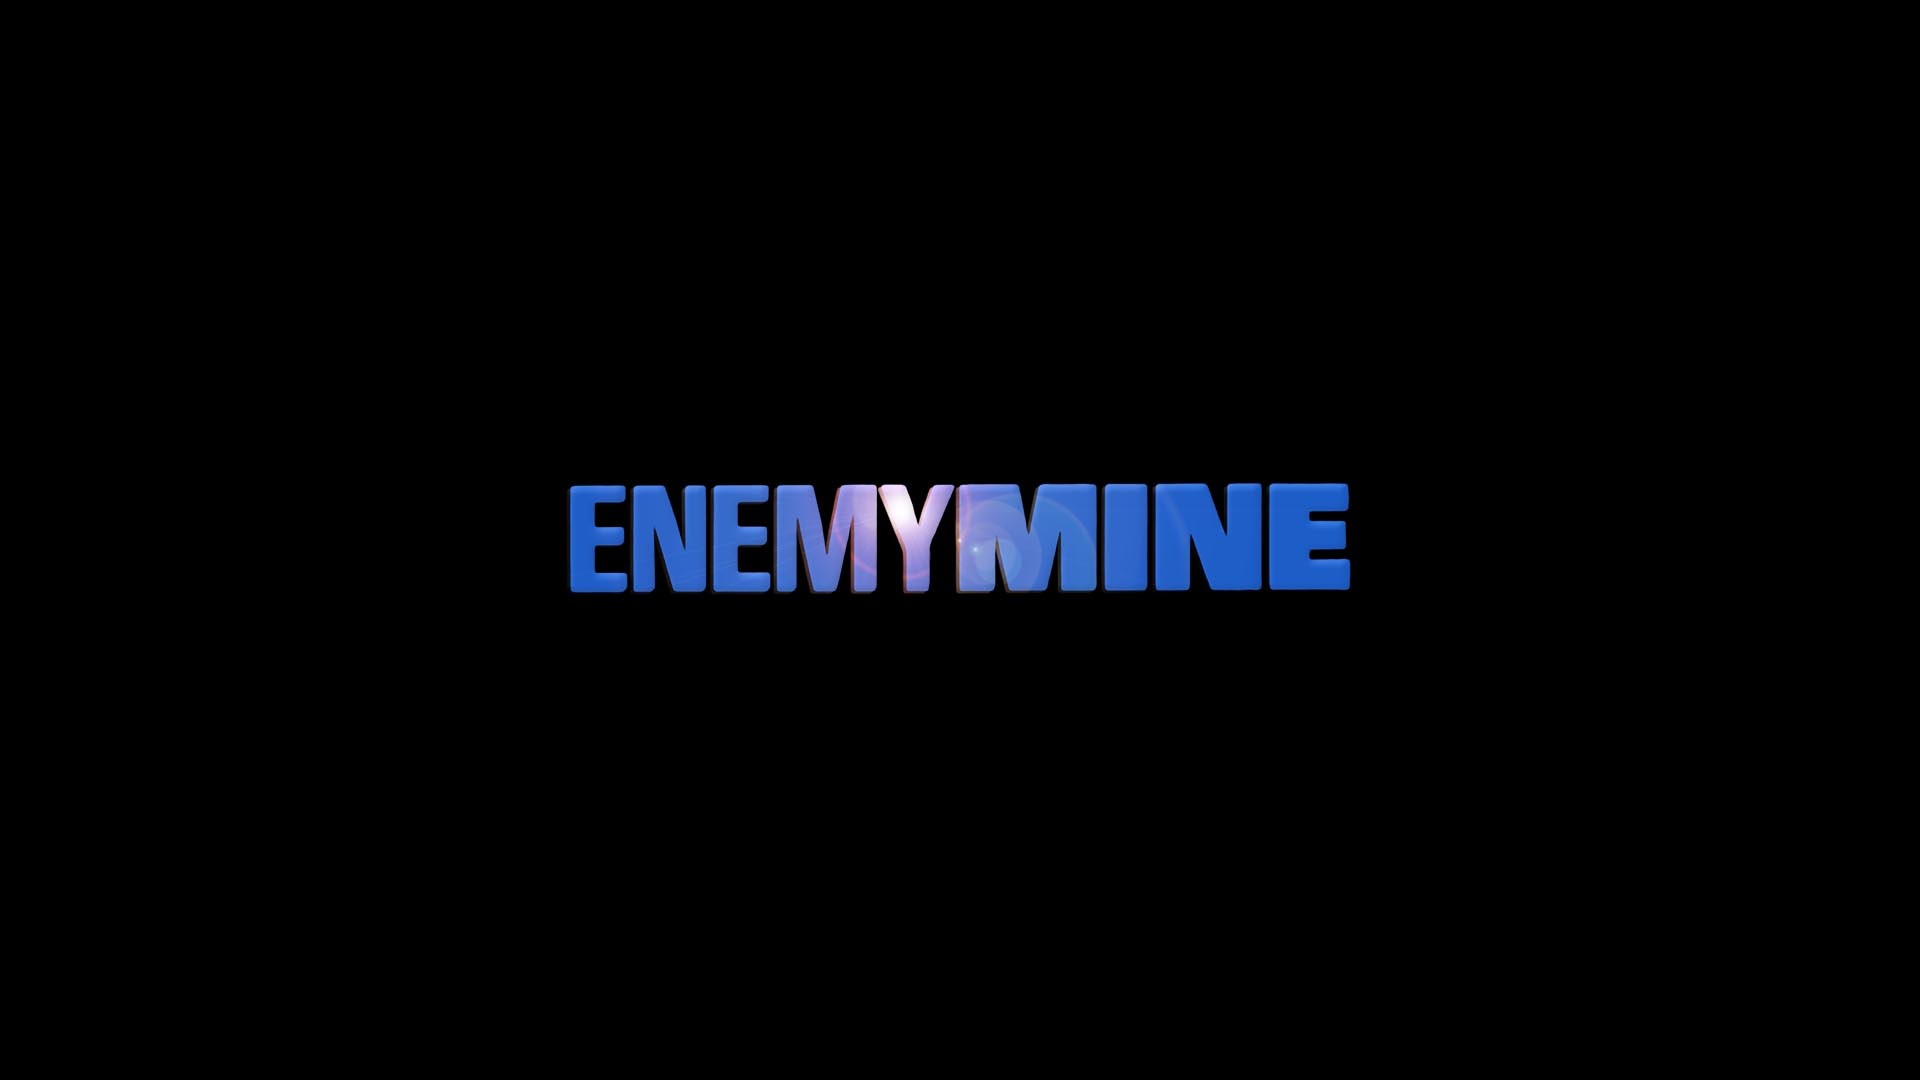 Best Enemy Mine Background for mobile